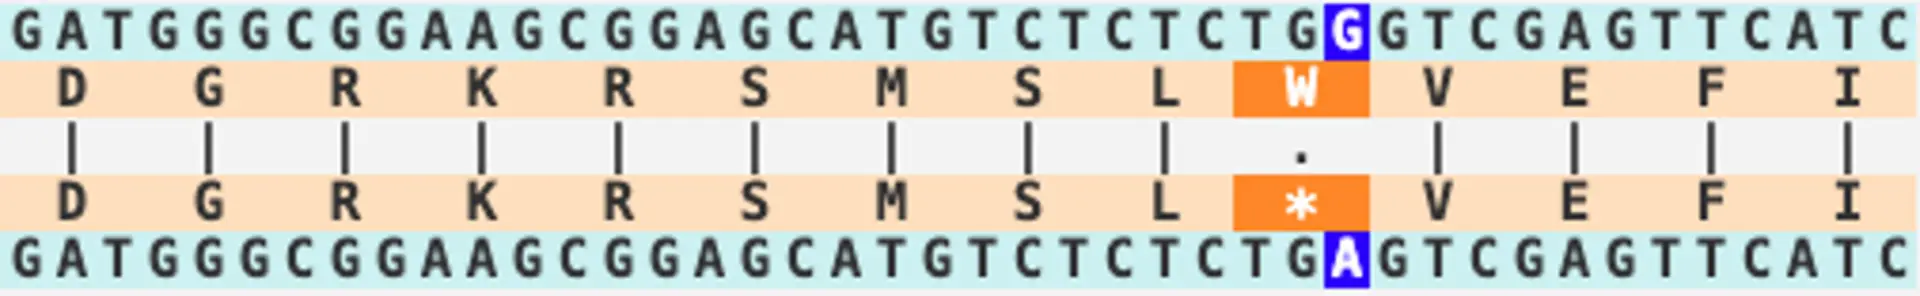 Alignment of the nucleotides and amino acid in the correct triplet codon frame shows that a single SNP can result in a stop codon, which will lead to a truncated protein sequence.